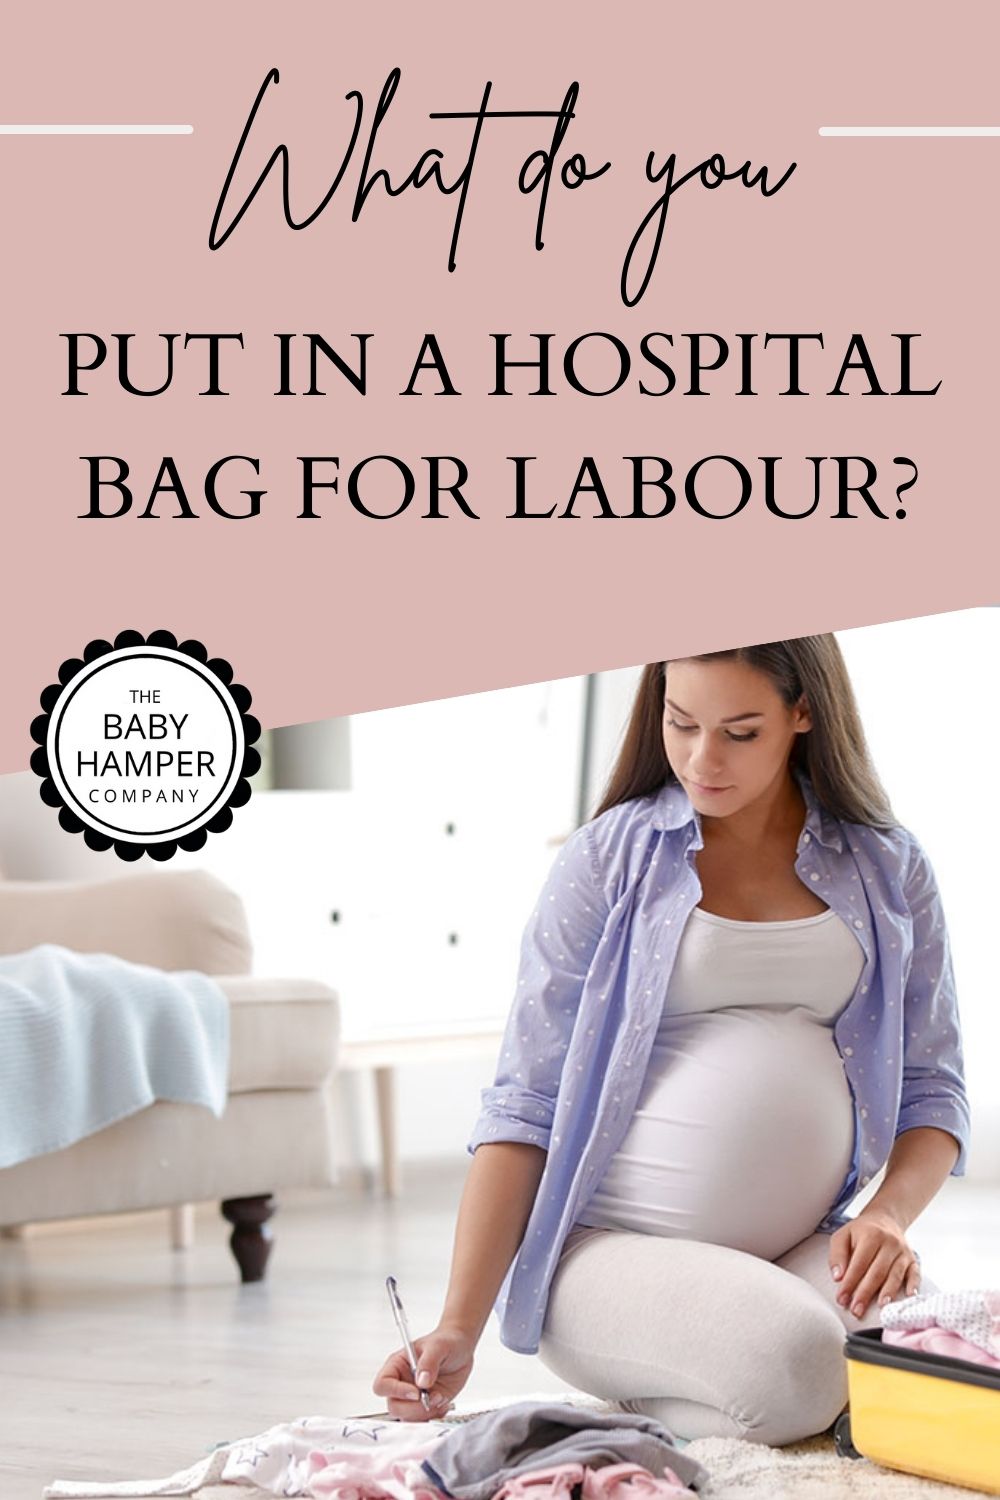 What do you put in a hospital bag for labour?